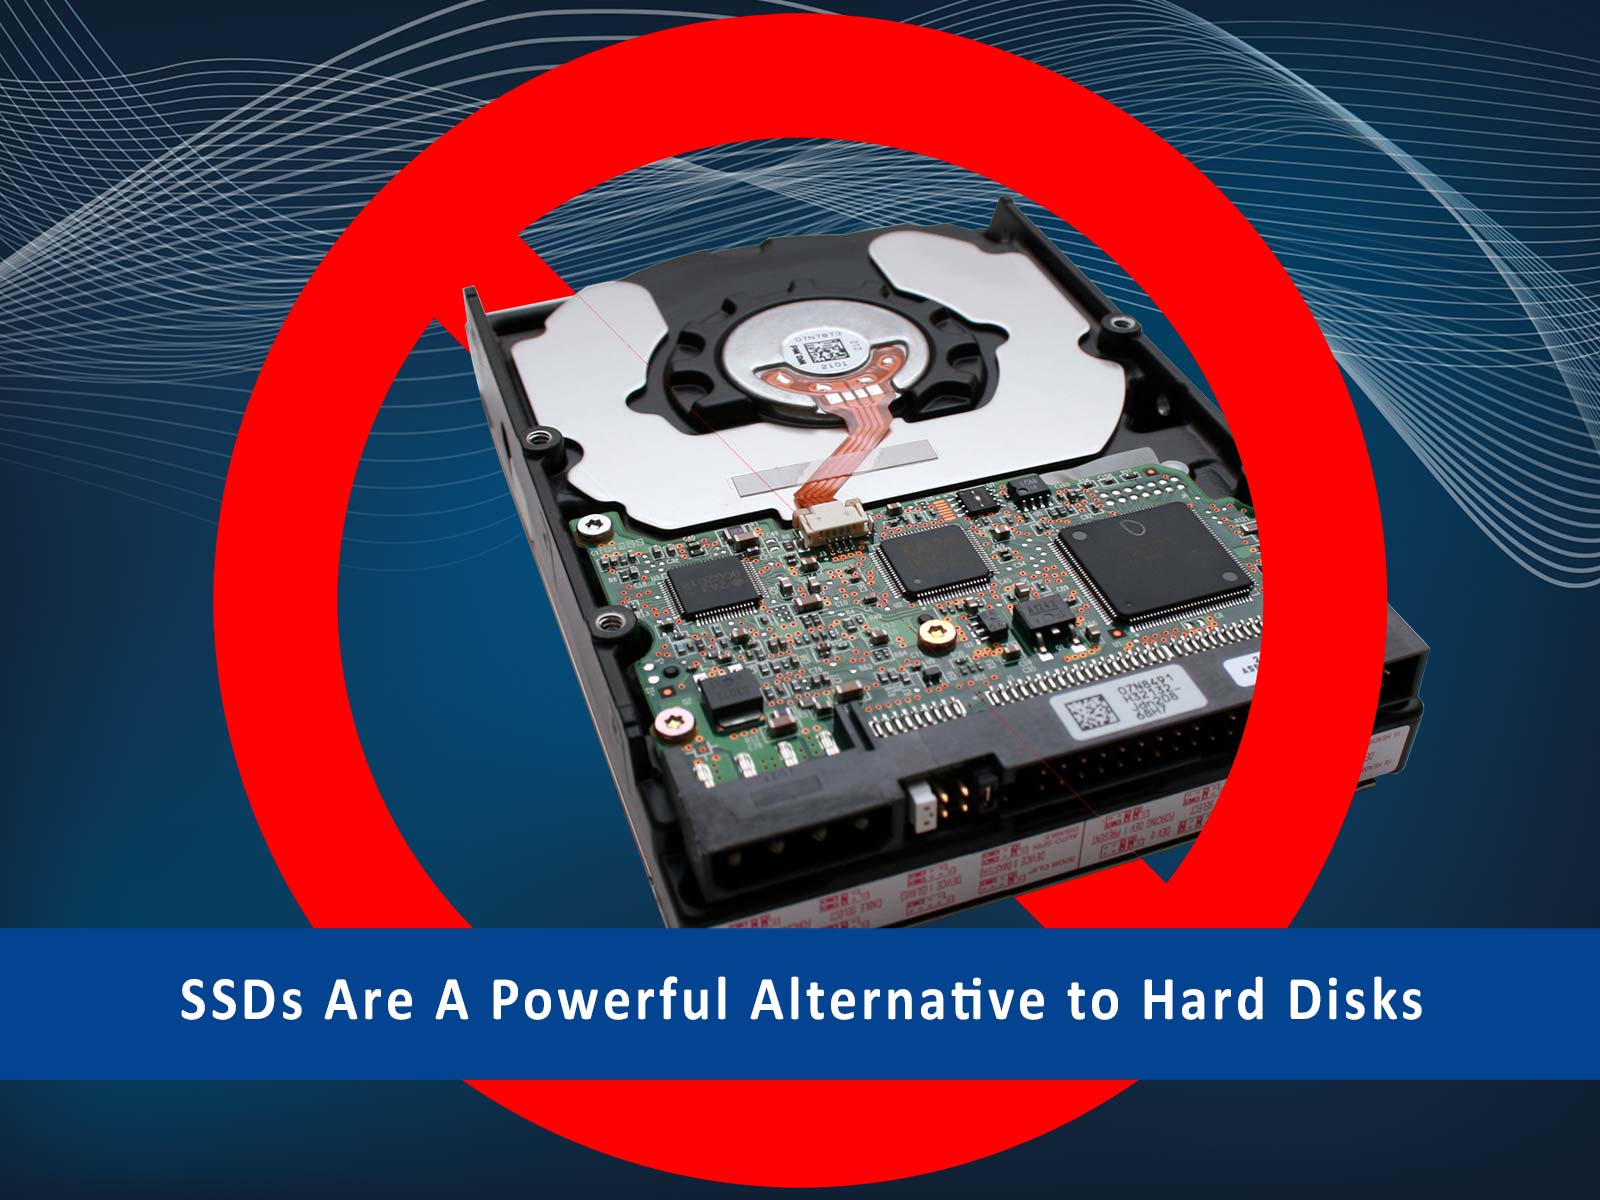 A picture of a solid state drive (SSD) with a red ban symbol over it, highlighting the post describing how ssds can improve the performance of PCs.